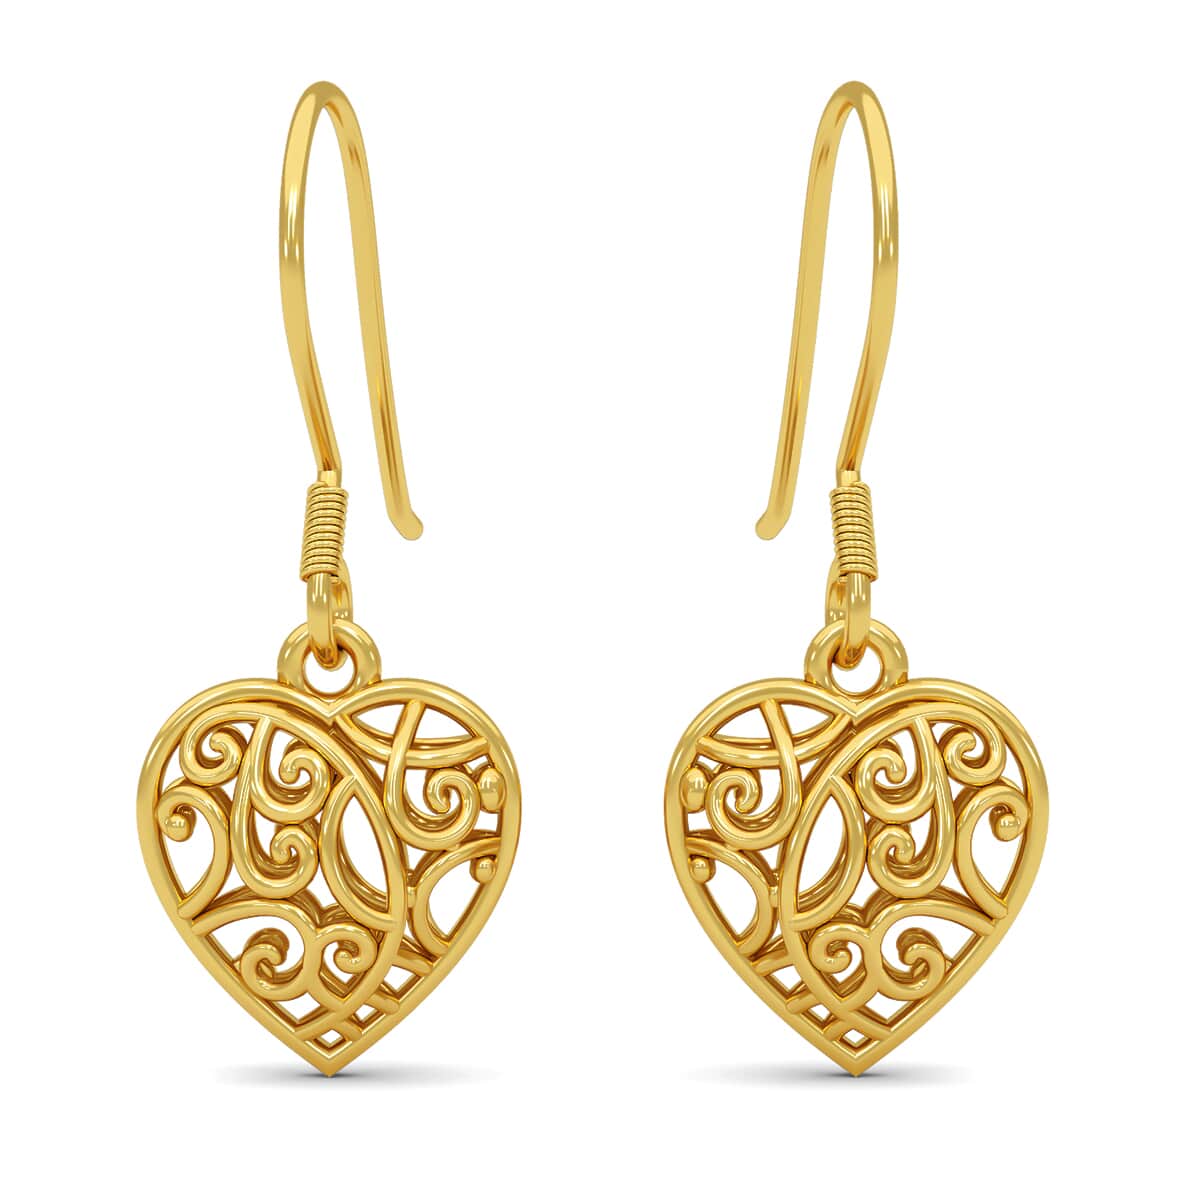 Mother’s Day Gift Openwork Drop Dangle Earrings in 14K Yellow Gold Plated Sterling Silver, Filigree Heart Earrings, Dangle Silver Earrings For Women image number 0